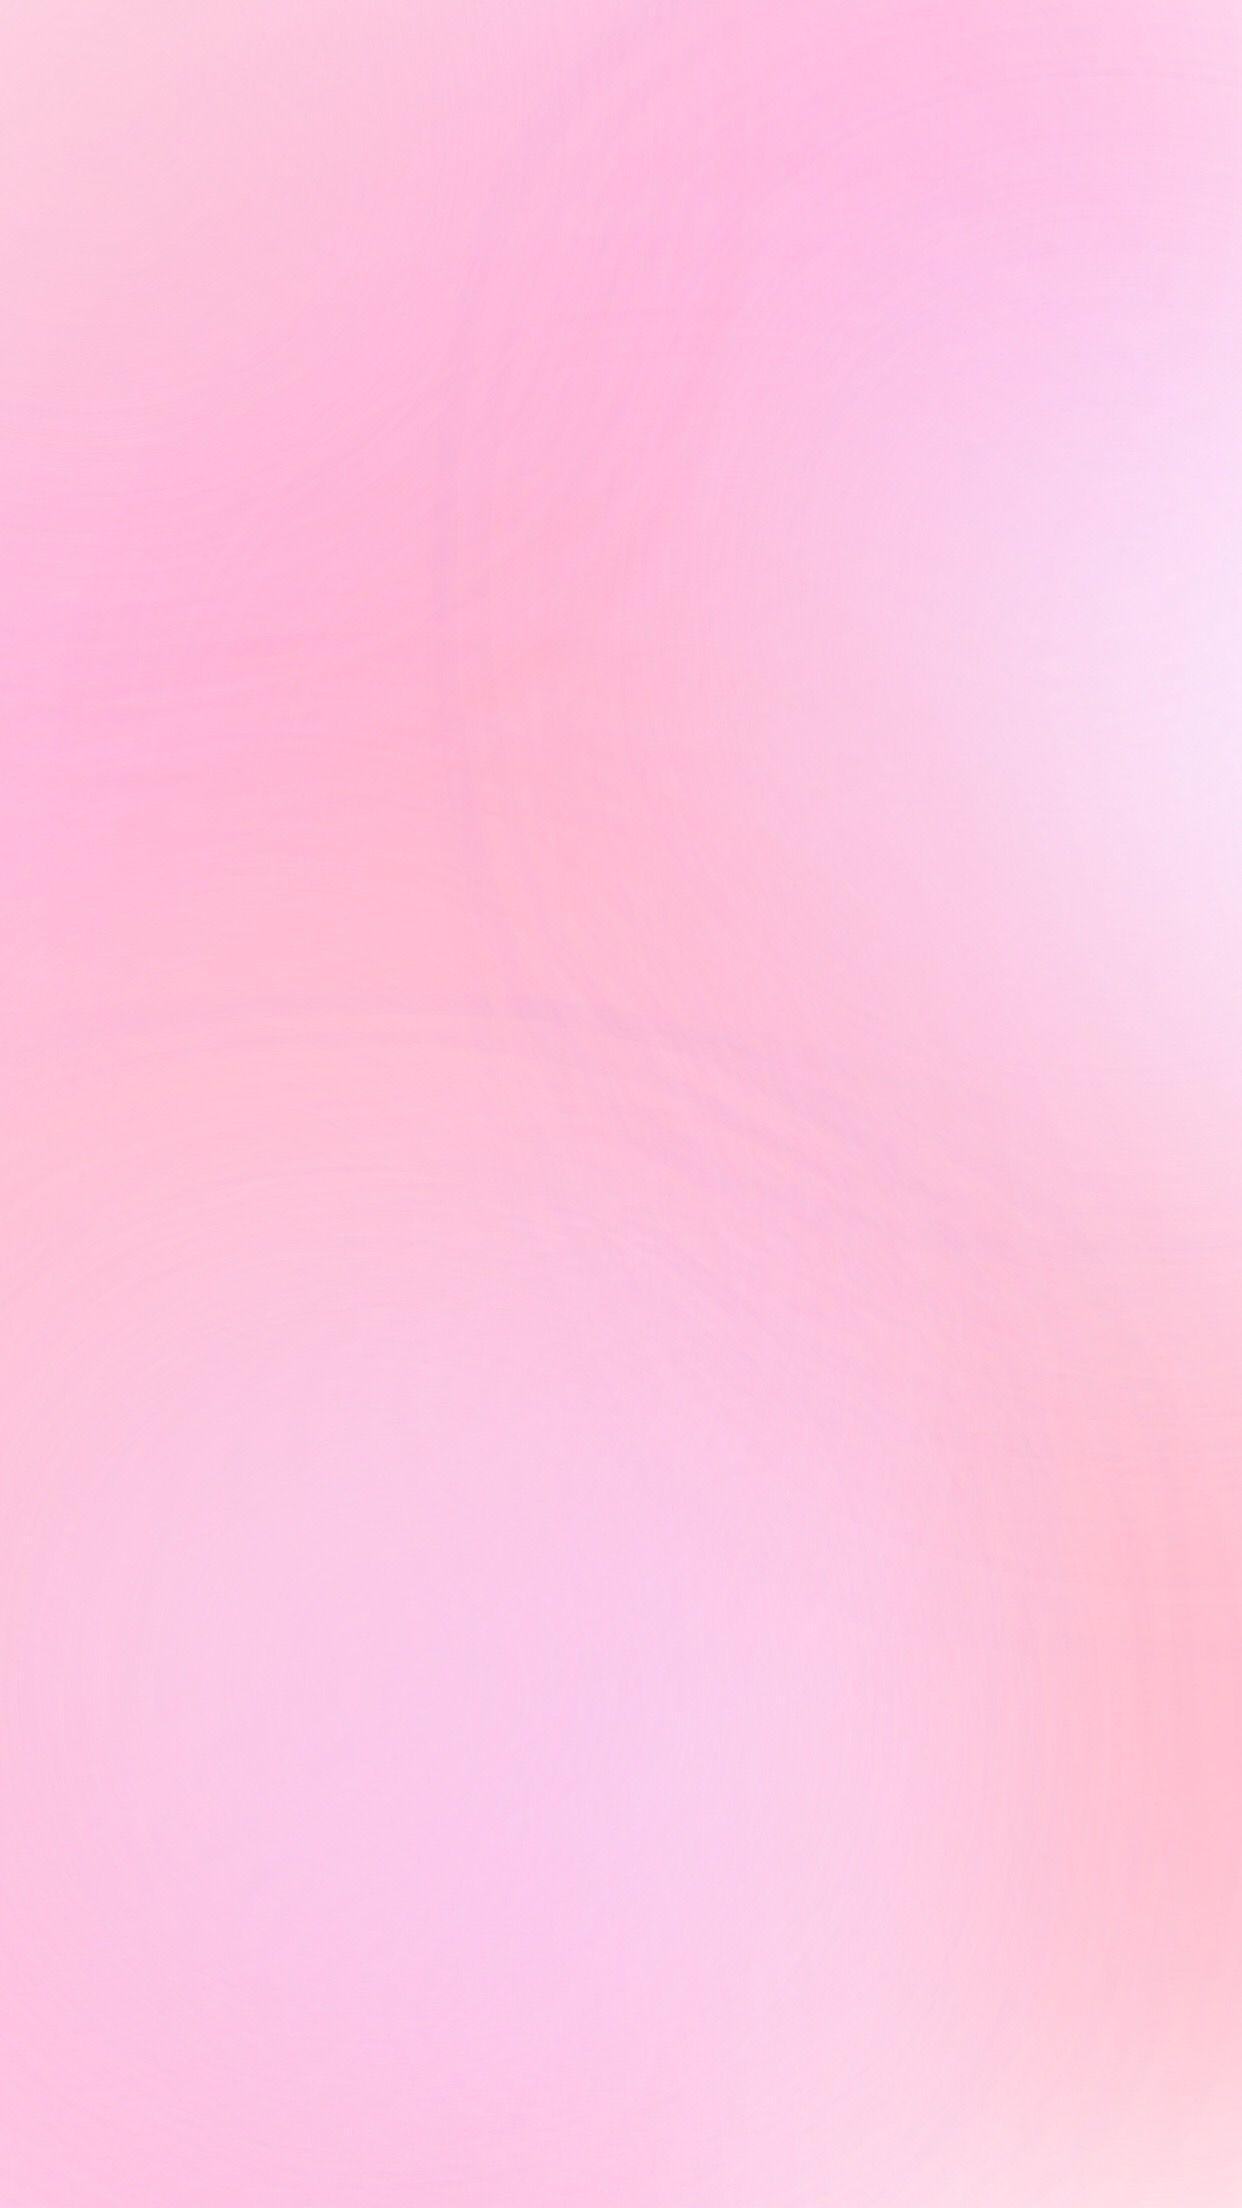 Solid Pastel Wallpapers - Top Free Solid Pastel Backgrounds